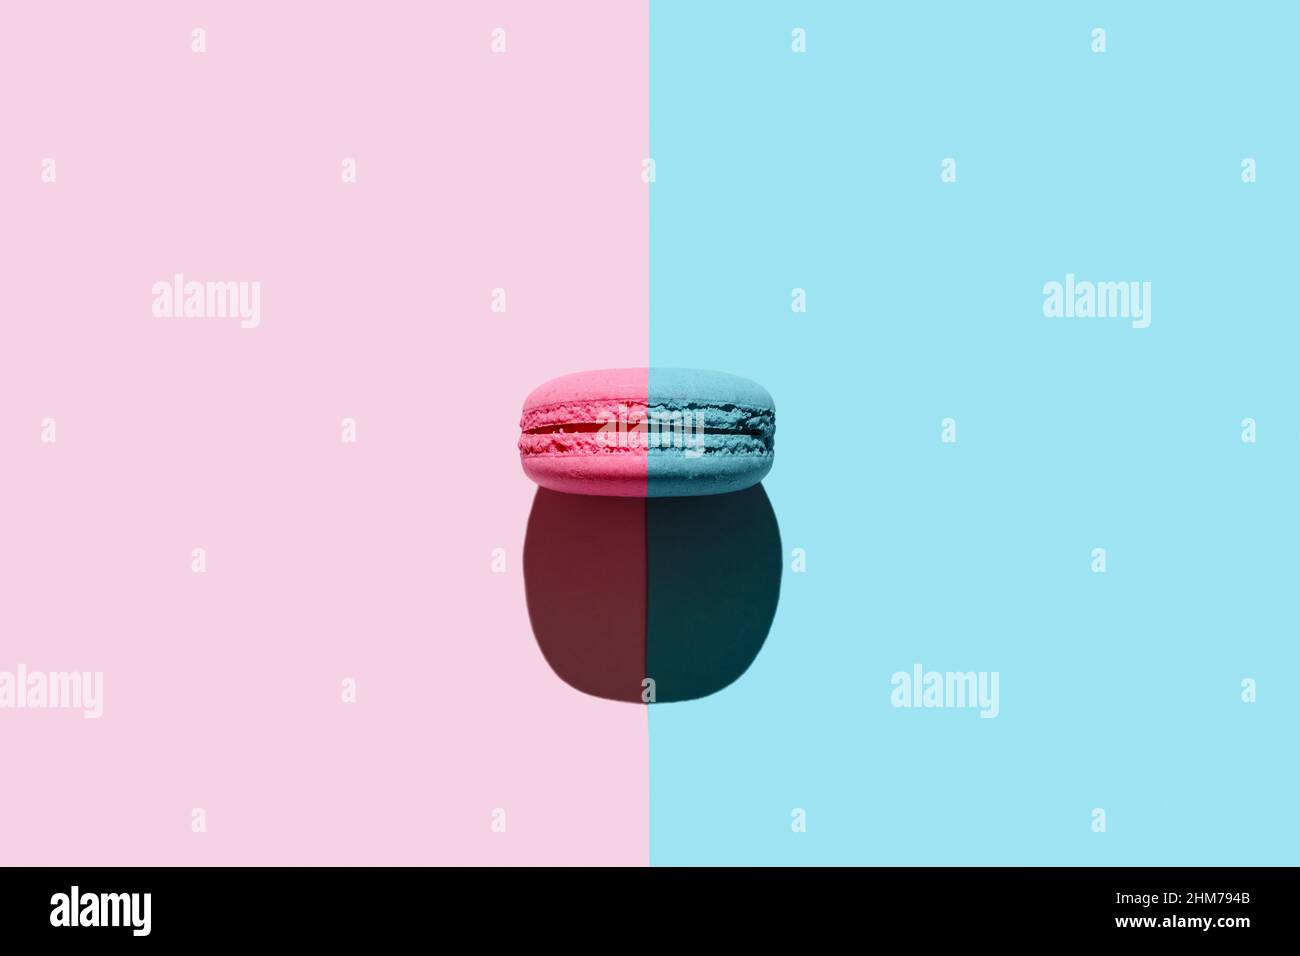 One macaroon with creative layout. Two colors duotone macaron with pink and blue background. Top view with hard light. Stock Photo